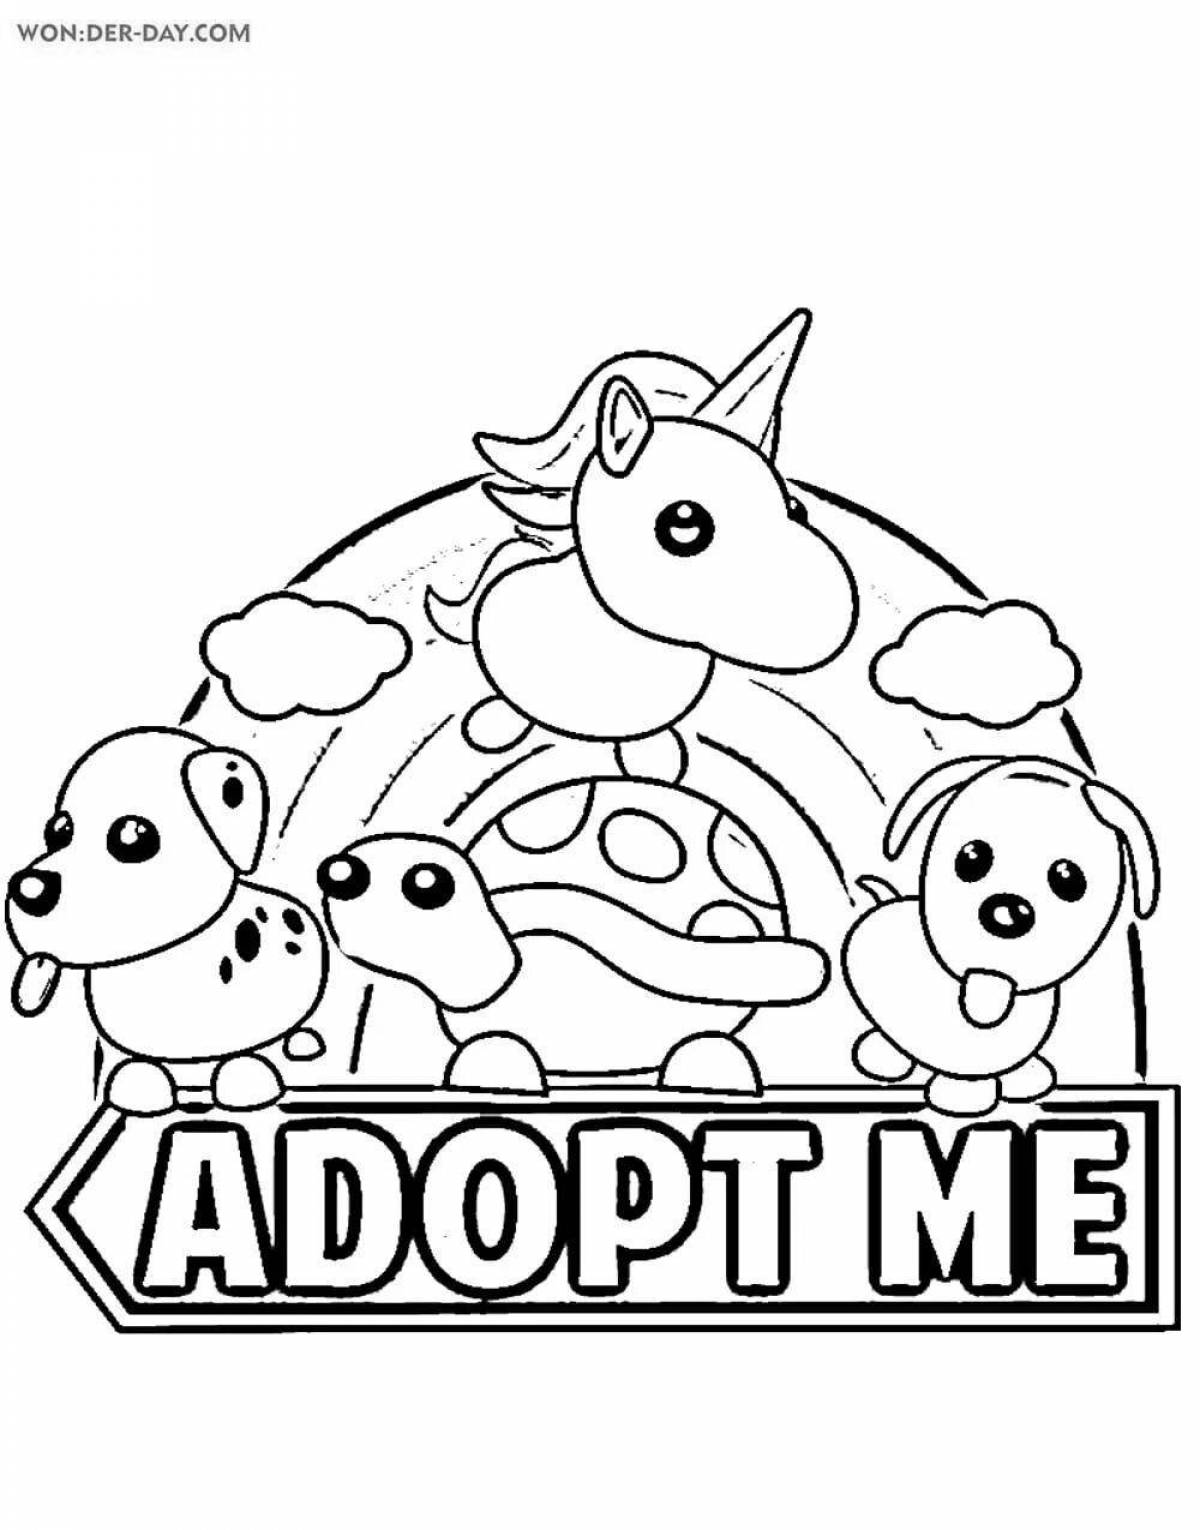 Adopt me pets fluffy coloring page